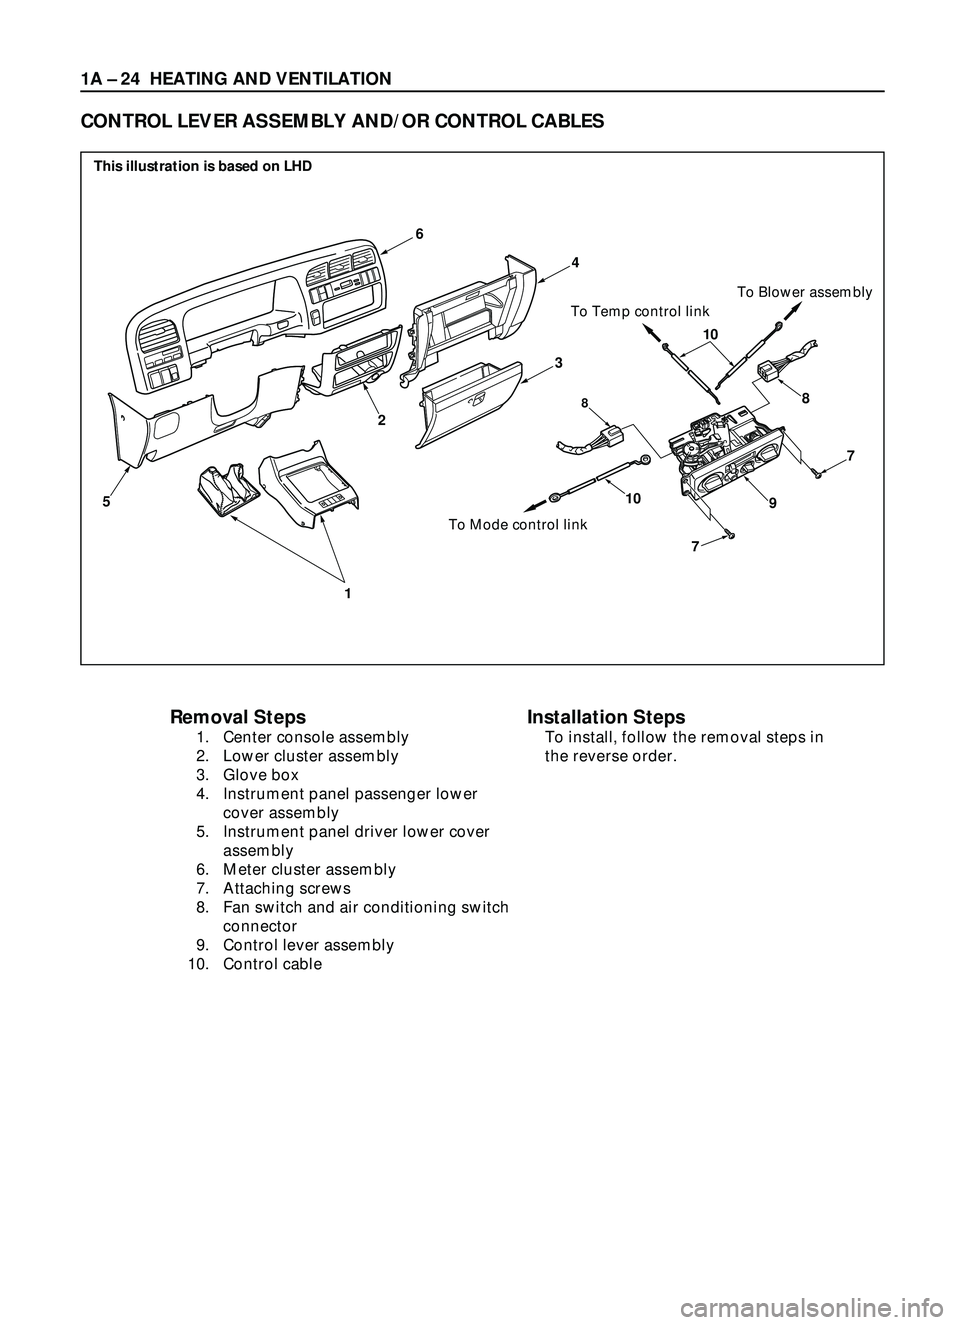 ISUZU TROOPER 1998  Service Repair Manual 1A Ð 24 HEATING AND VENTILATION
Removal Steps
1. Center console assembly
2. Lower cluster assembly
3. Glove box
4. Instrument panel passenger lower
cover assembly
5. Instrument panel driver lower cov